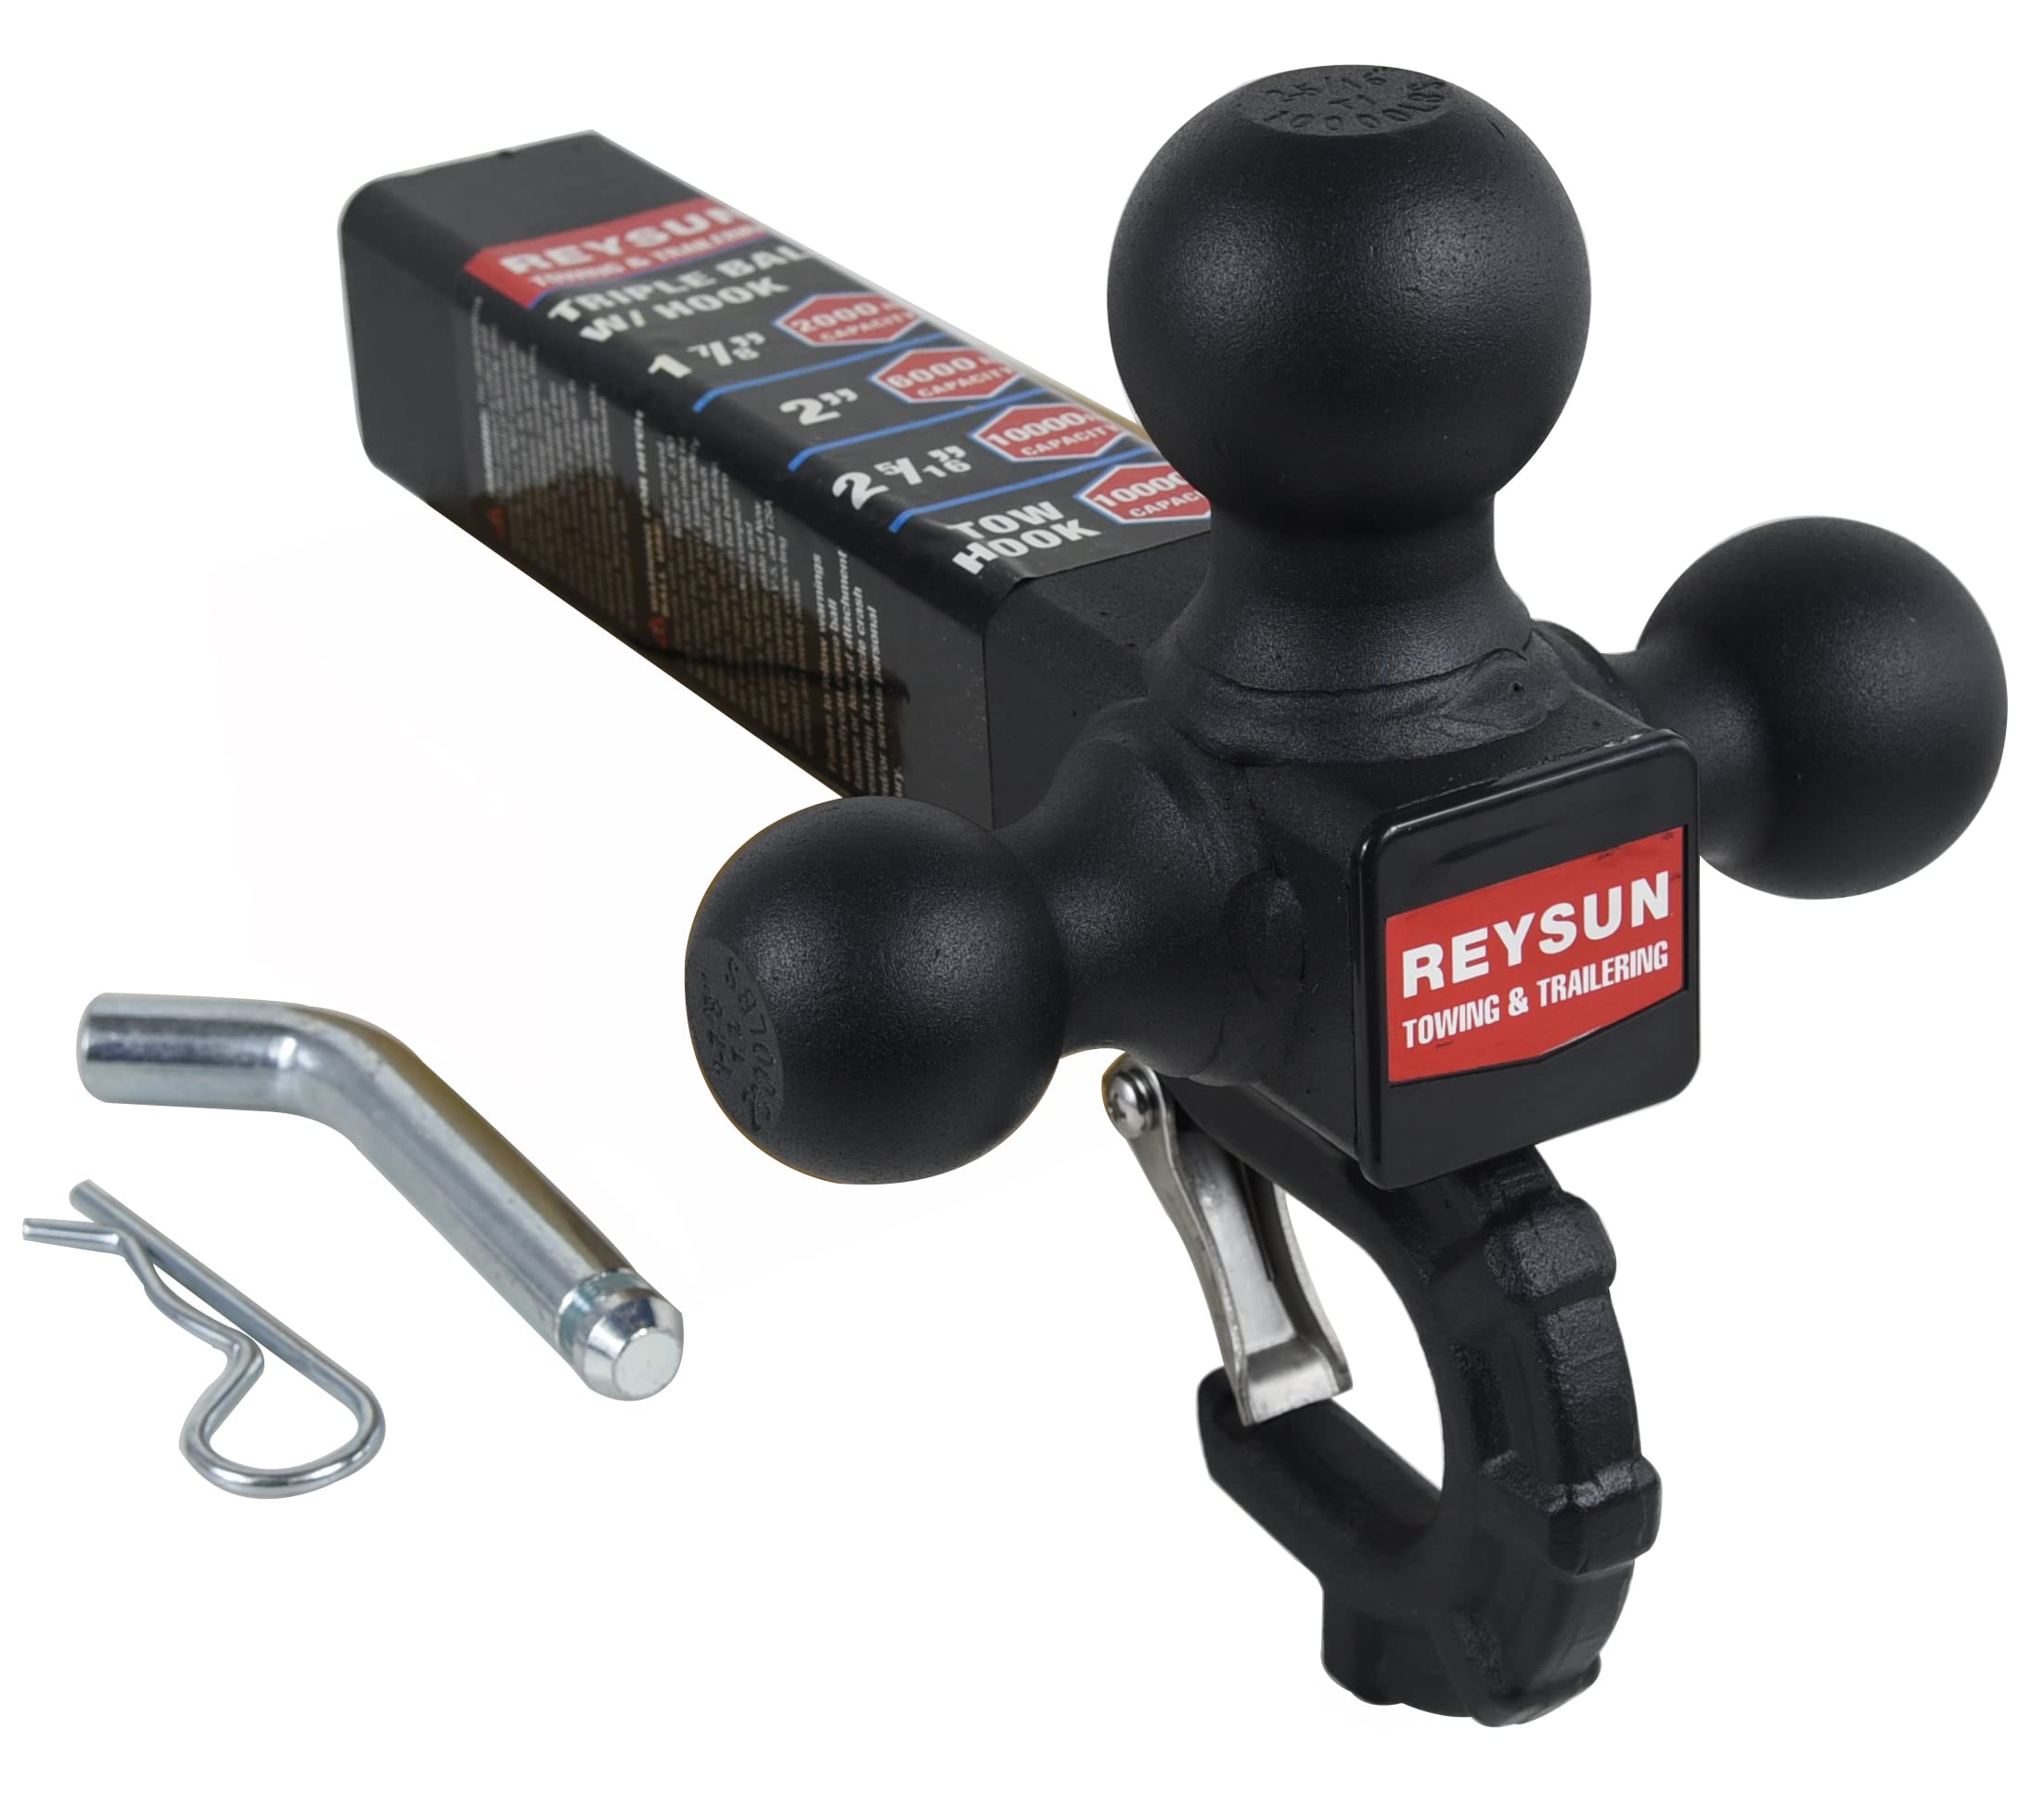 REYSUN Trailer Hitch Tri Ball Mount with Hook, Tactical Tow Hook, Fits 2 inch Hitch Receiver, Secure with Self-Lock Latch, Matt 